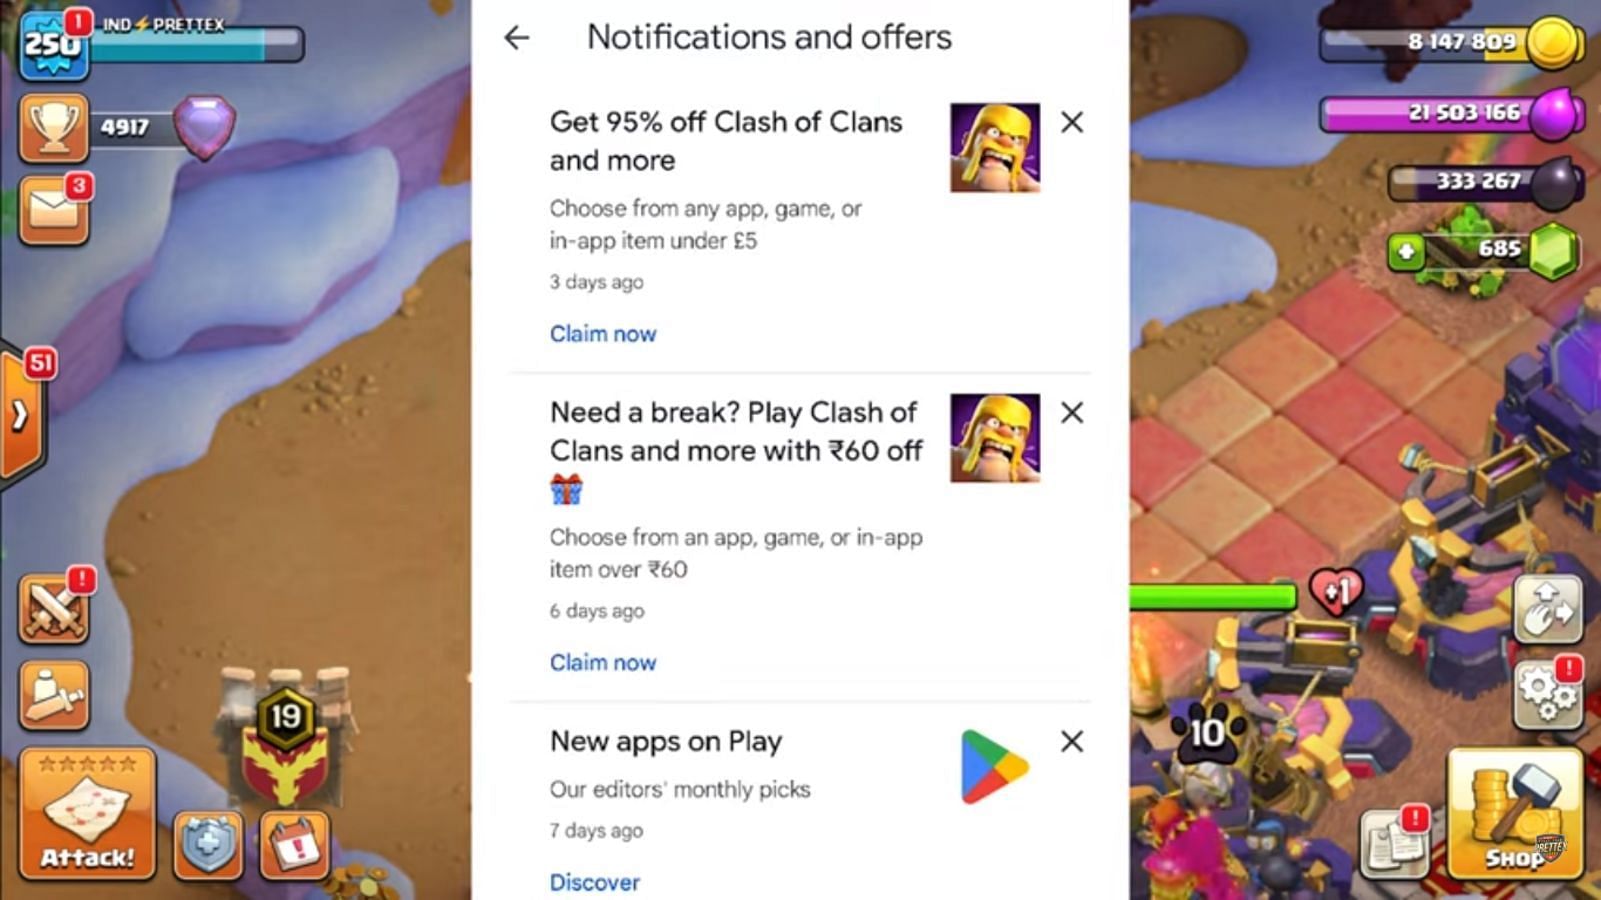 Clash of Clans 95% discount offer (Image via Prettex Gaming/YouTube || Supercell)